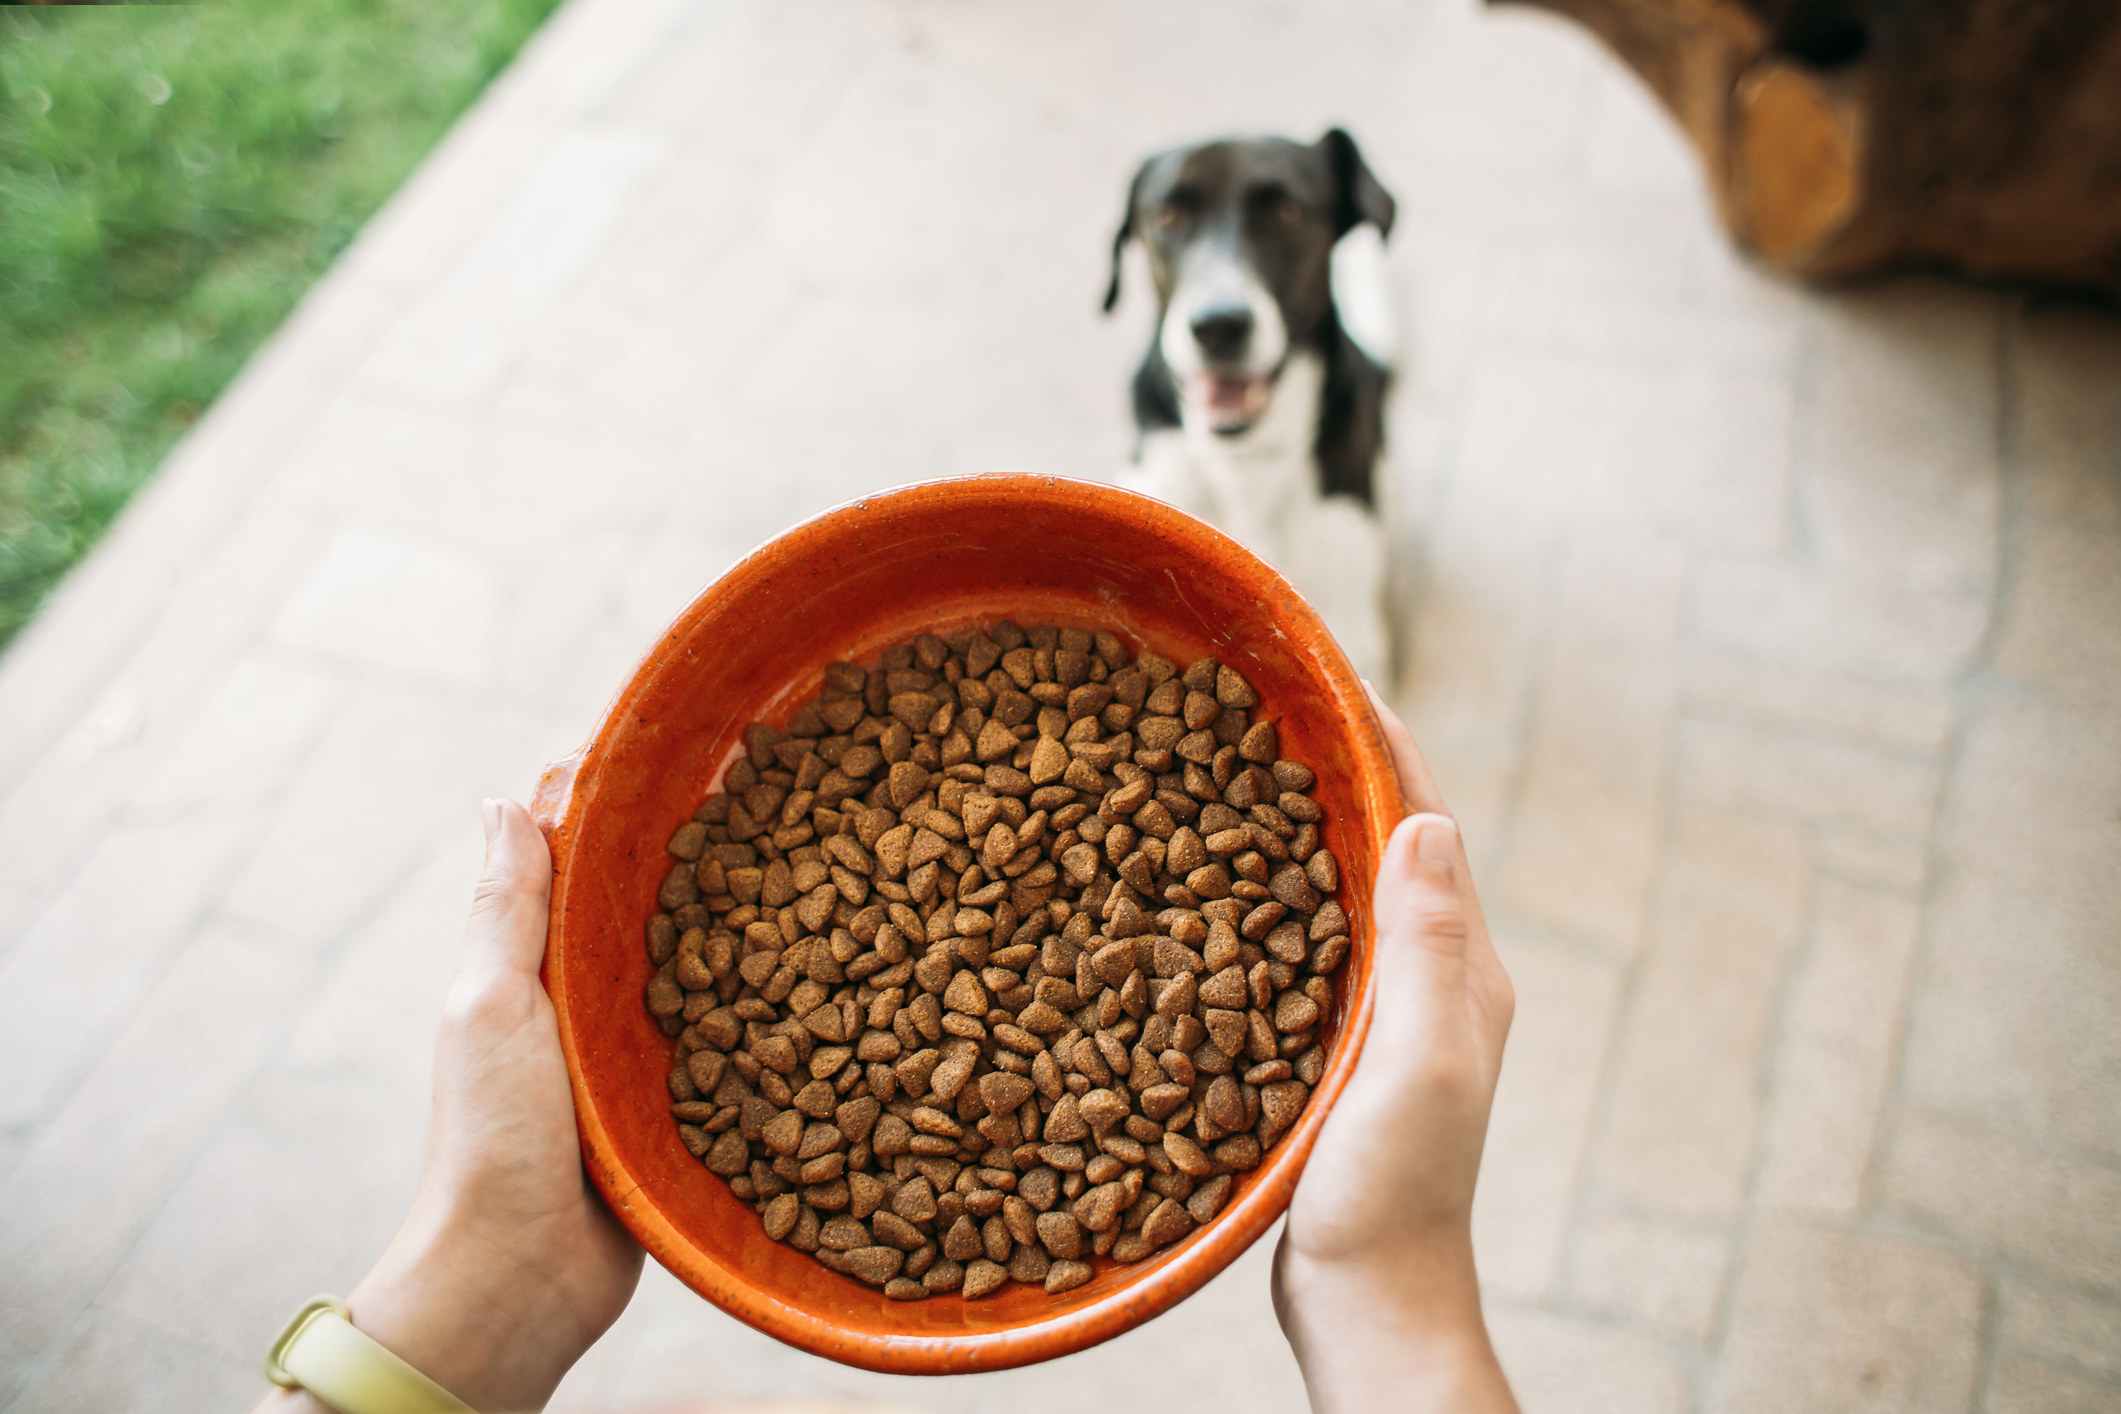 A person holding a bowl of dog food in front of their dog